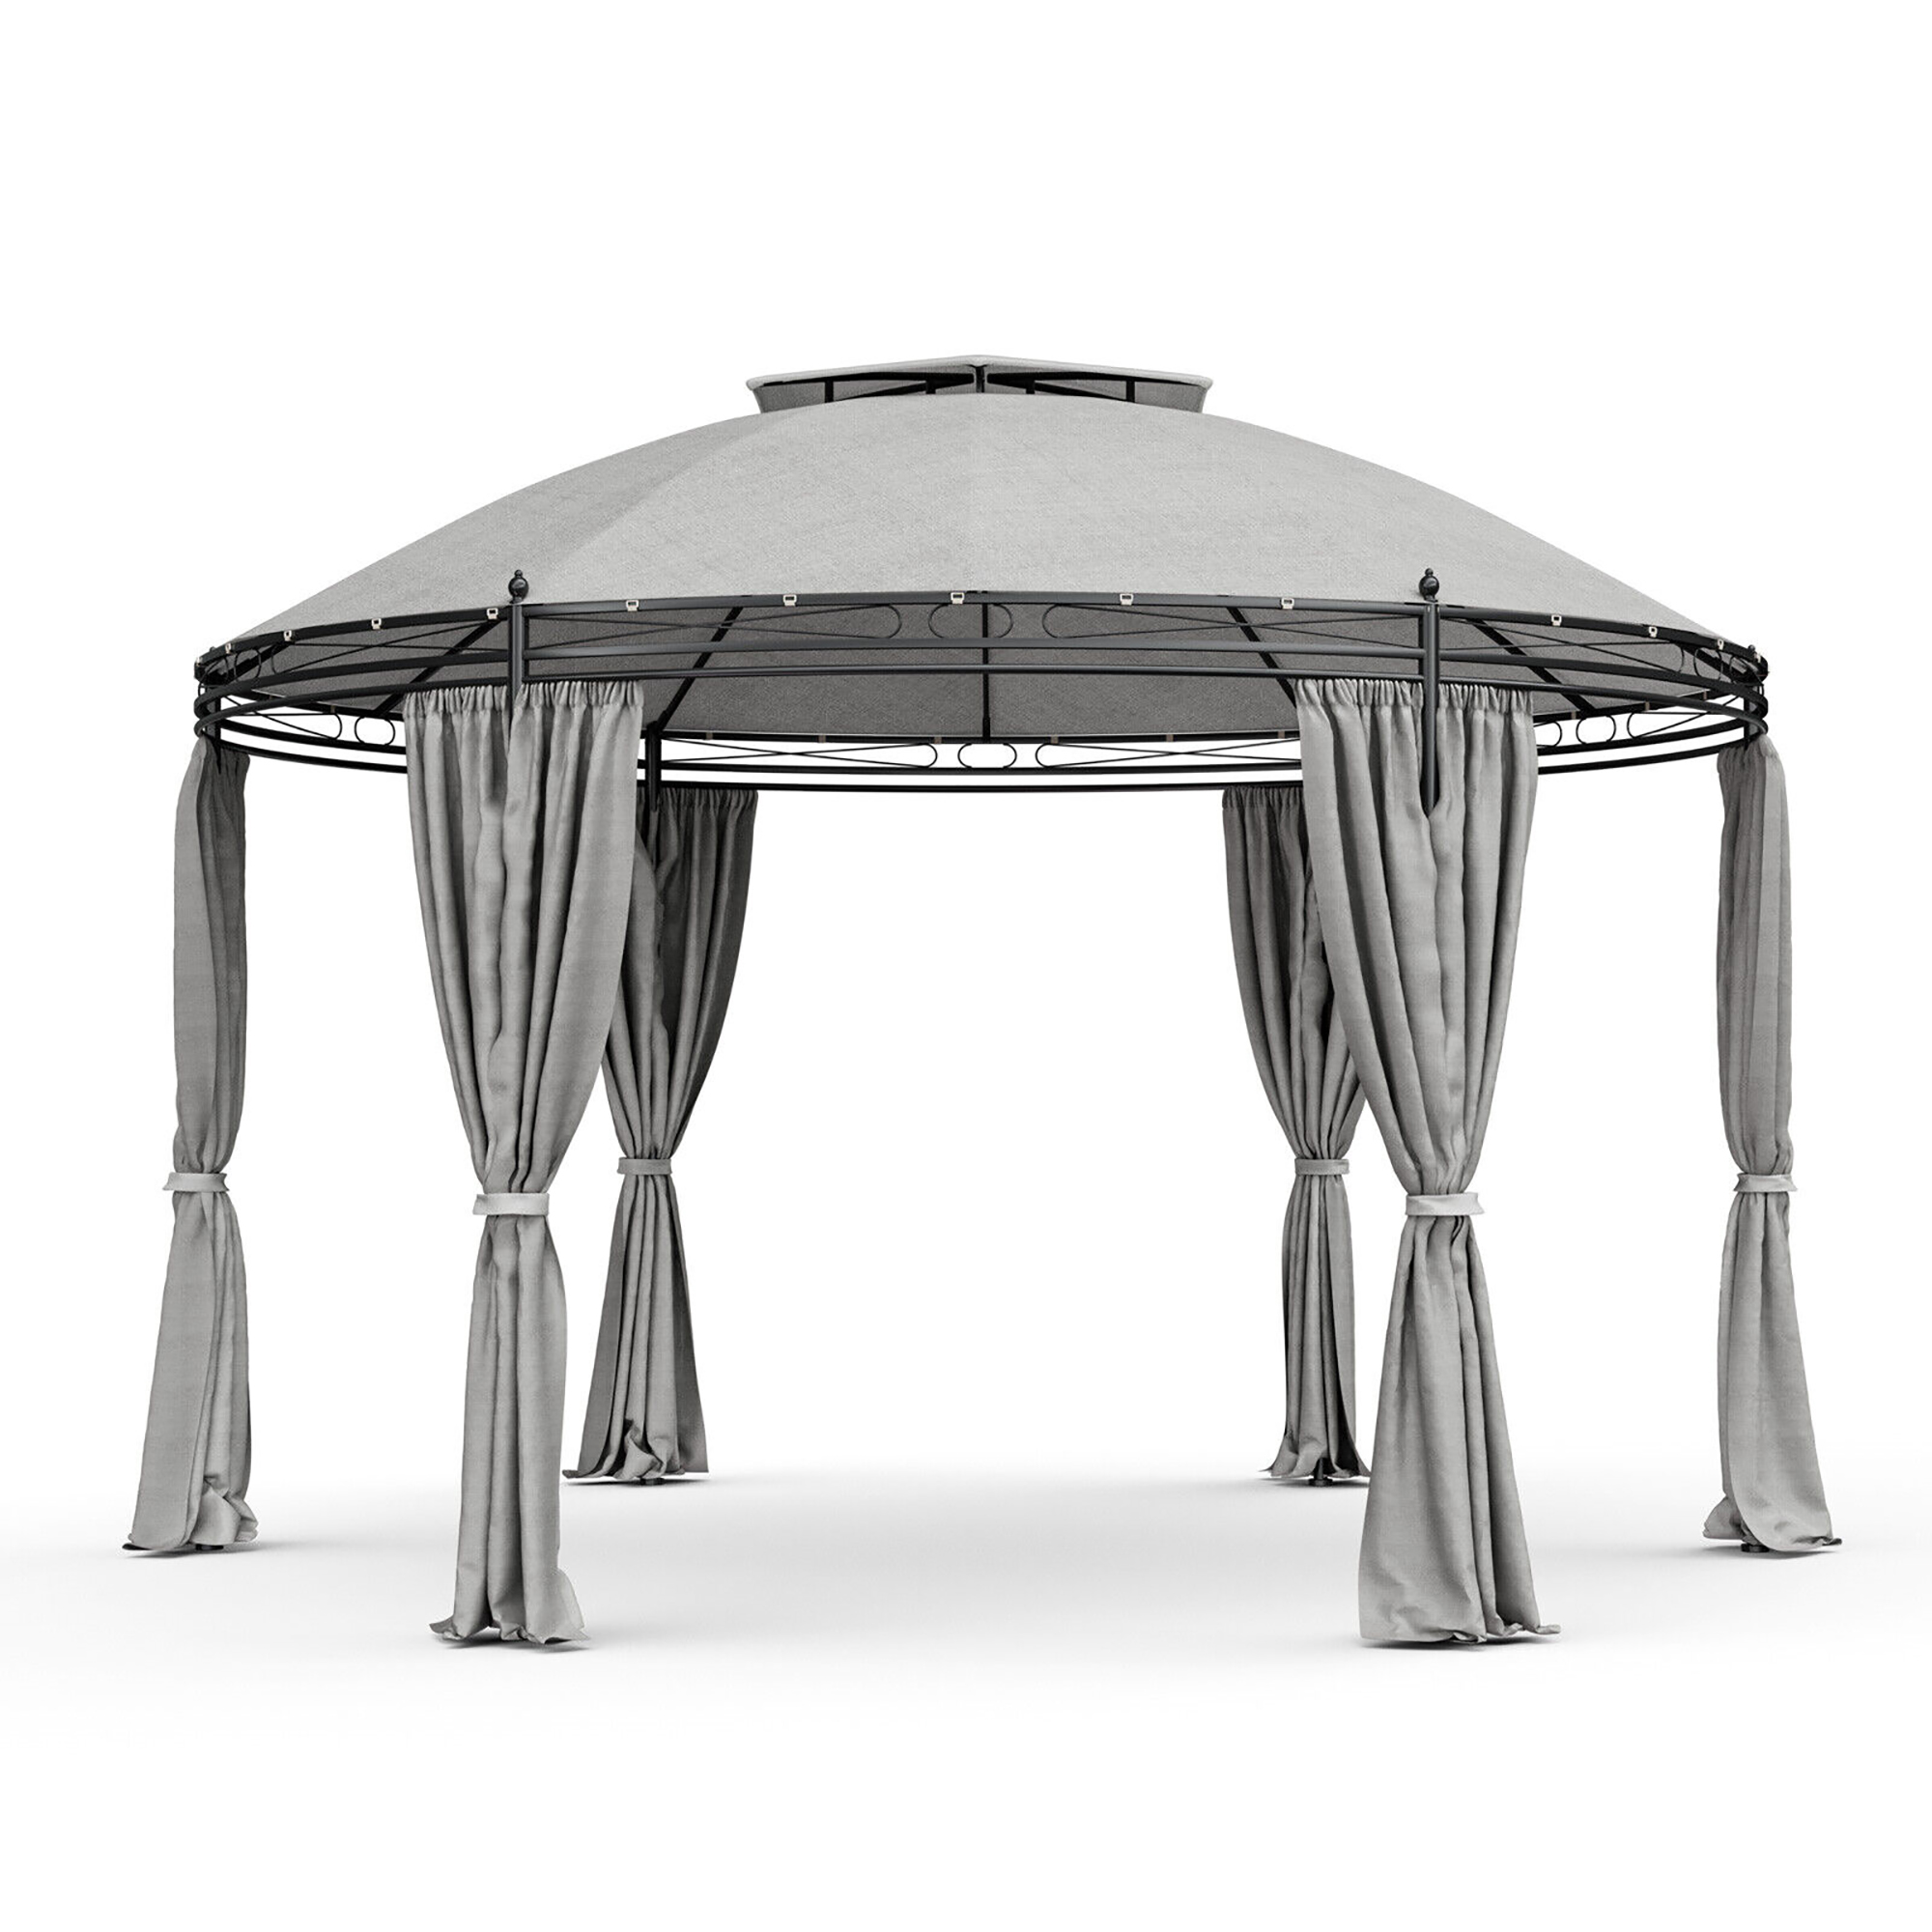 Gymax 11.5' Outdoor Patio Round Dome Gazebo Canopy Shelter Double Roof Steel Gray